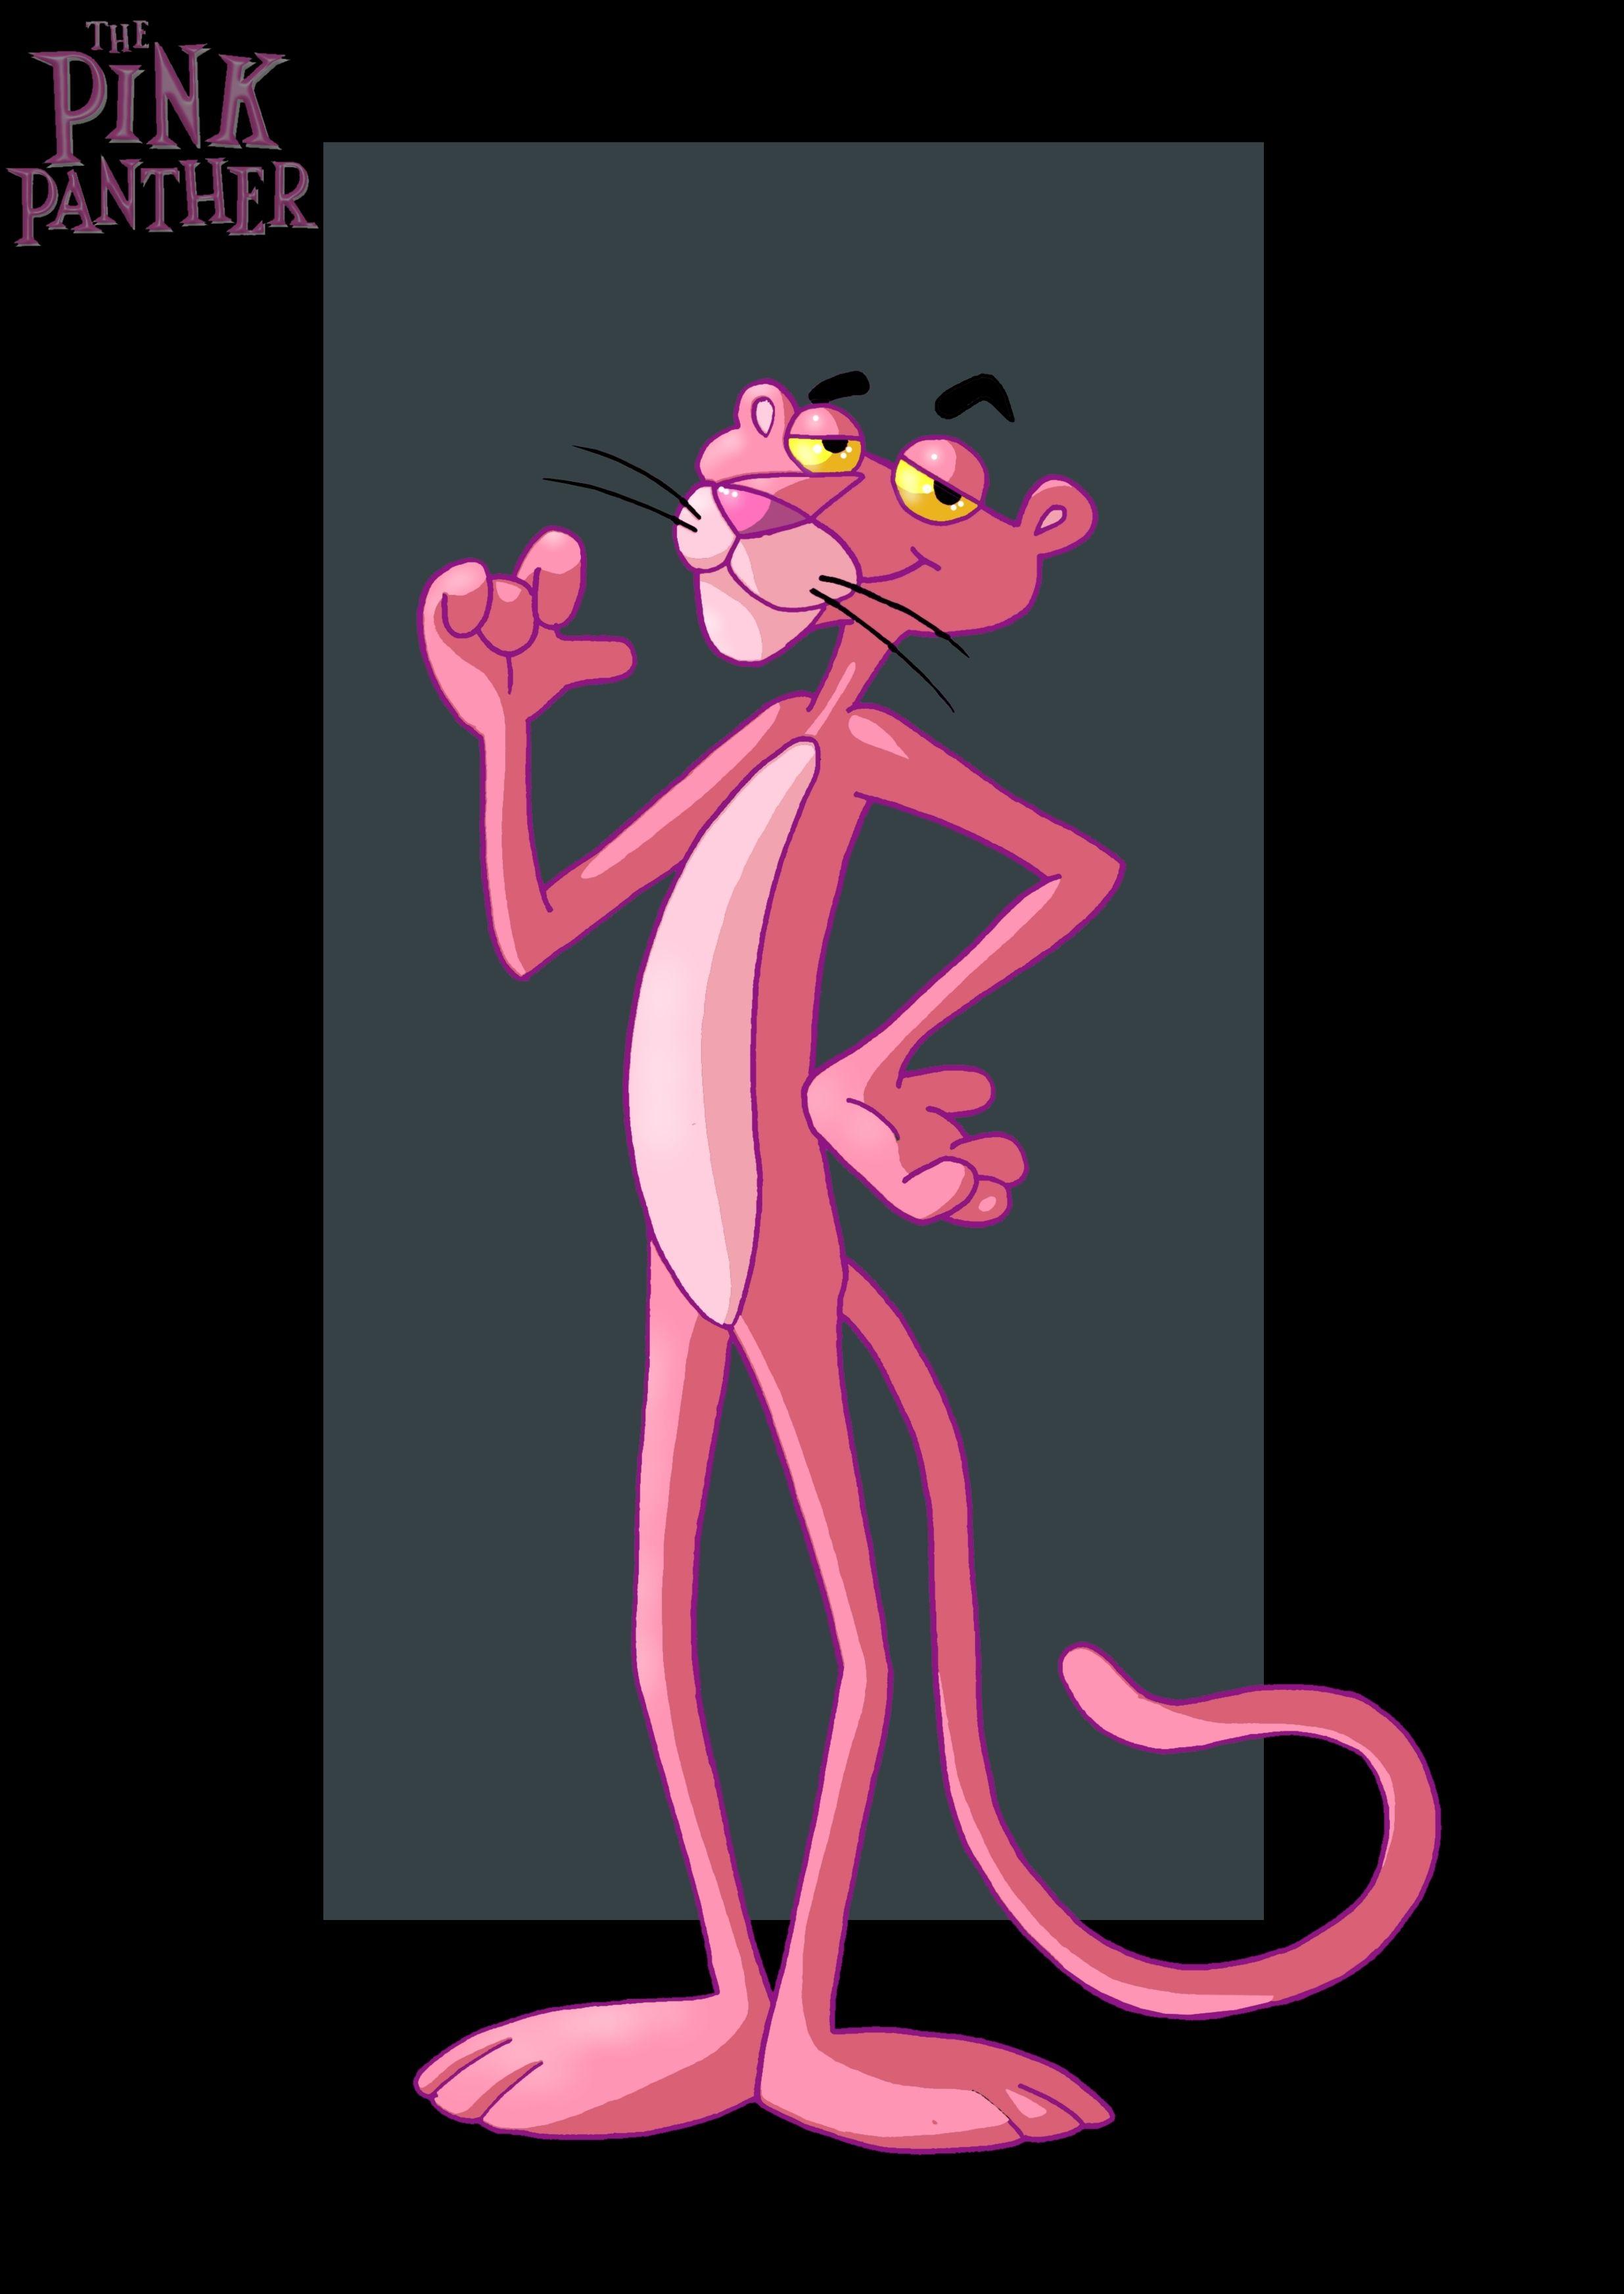 The pink panther is standing with his arms crossed - Pink Panther